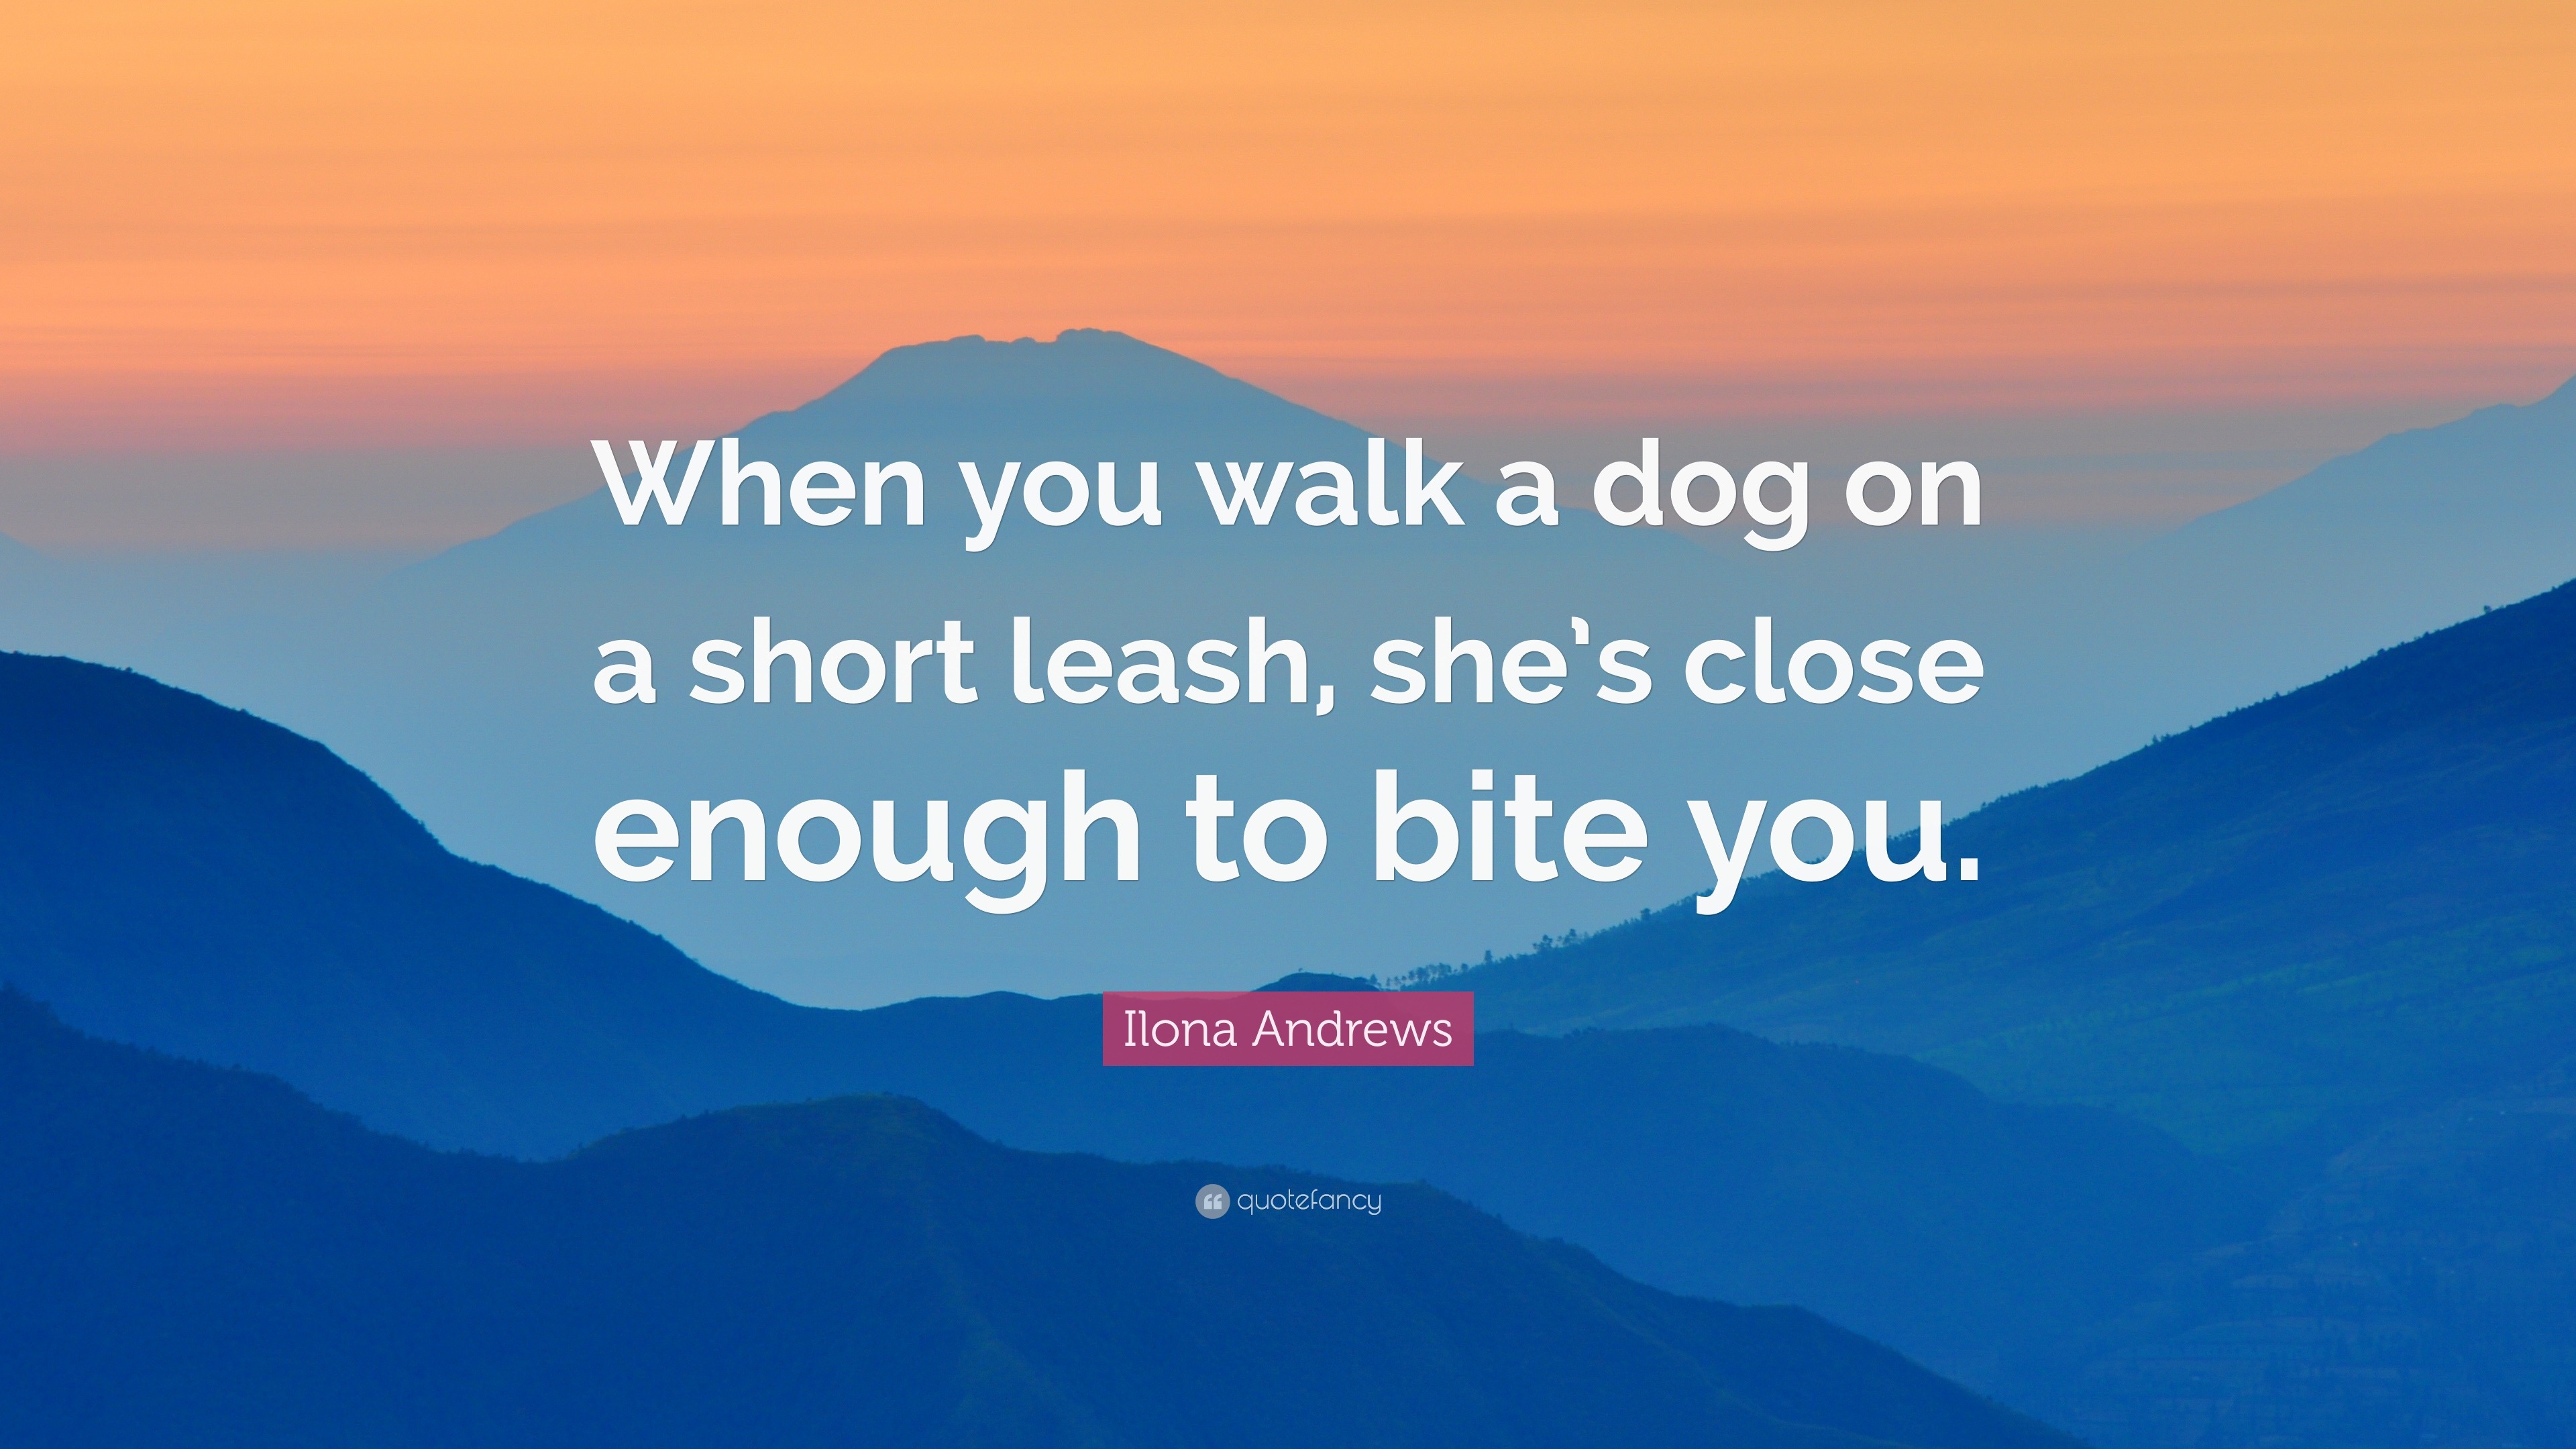 Ilona Andrews Quote: “When you walk a dog on a short leash, she’s close ...